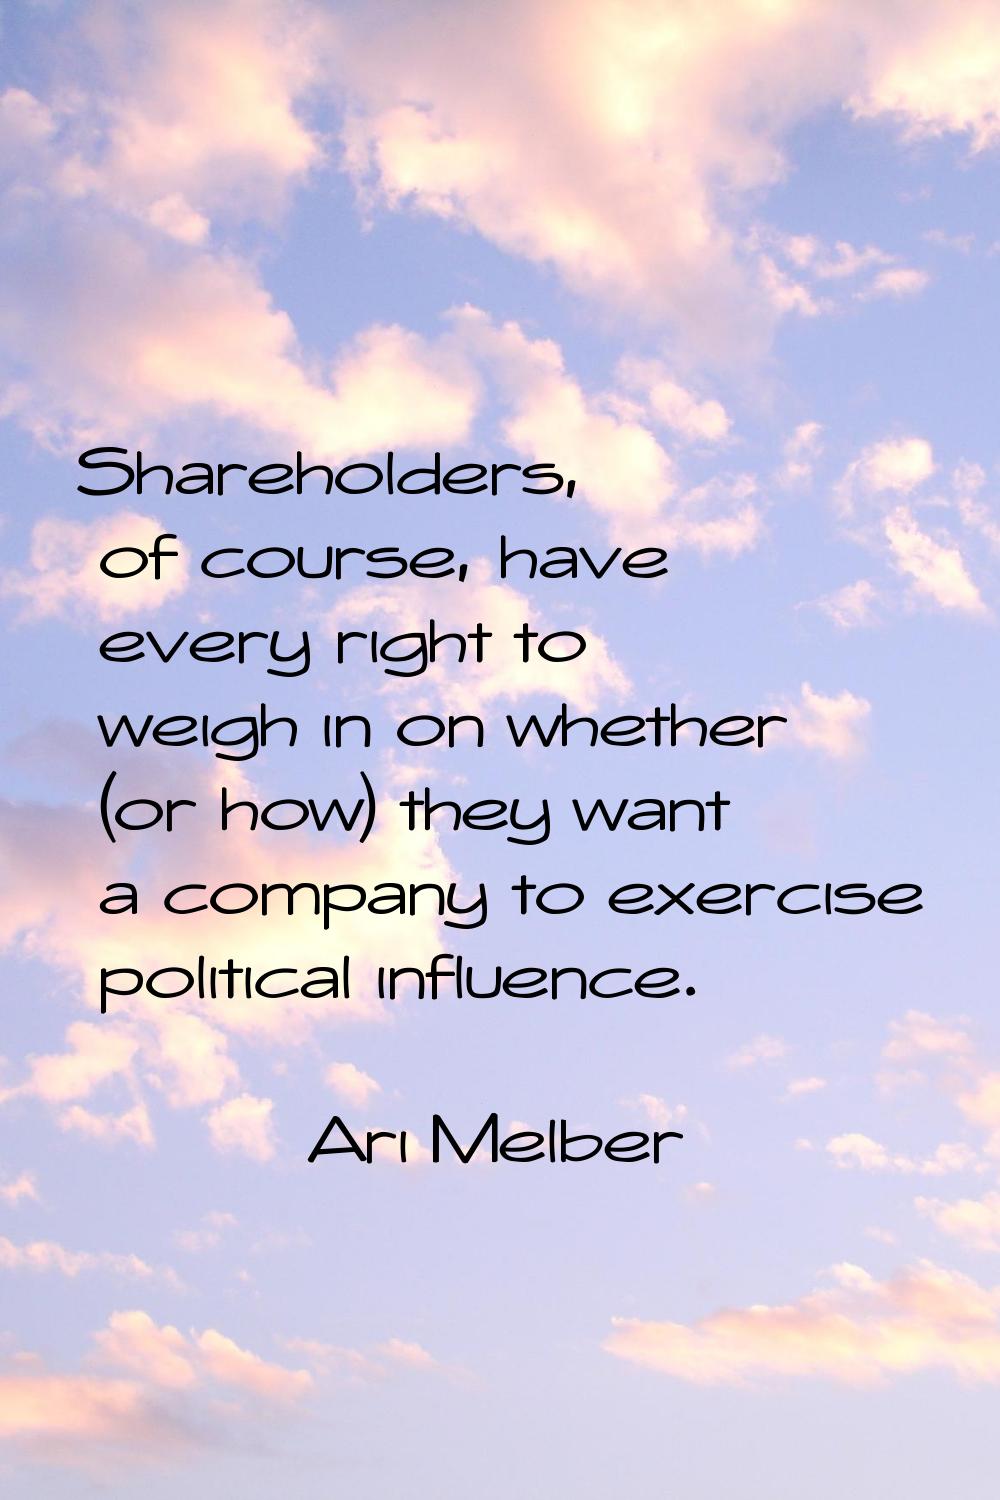 Shareholders, of course, have every right to weigh in on whether (or how) they want a company to ex